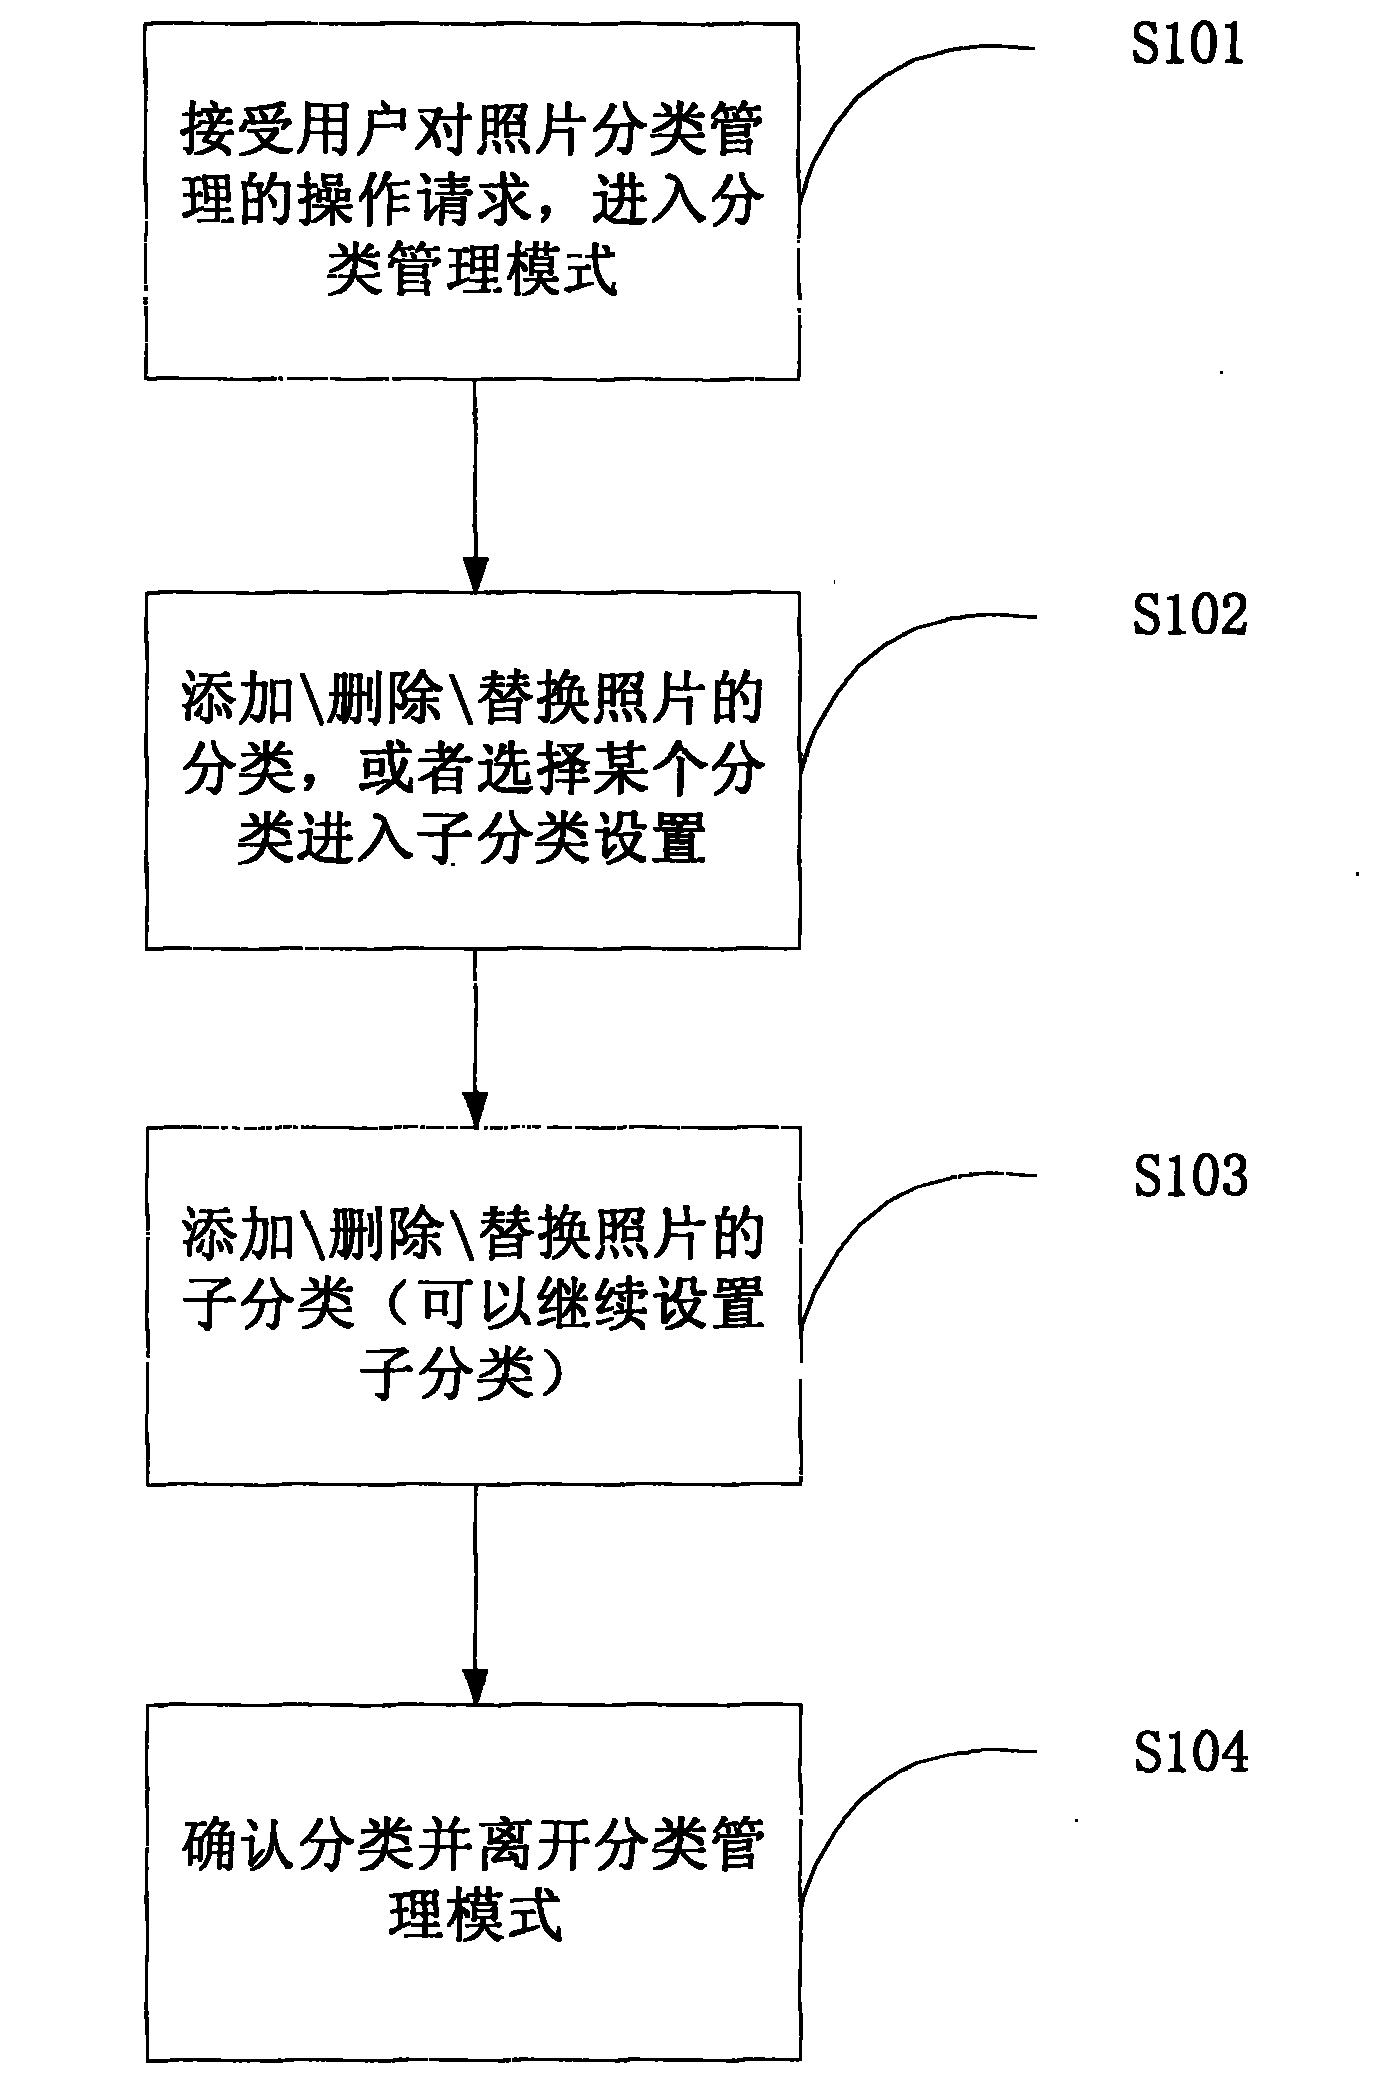 Method for realizing multi-level classified management of digital photos on digital TV and set top box